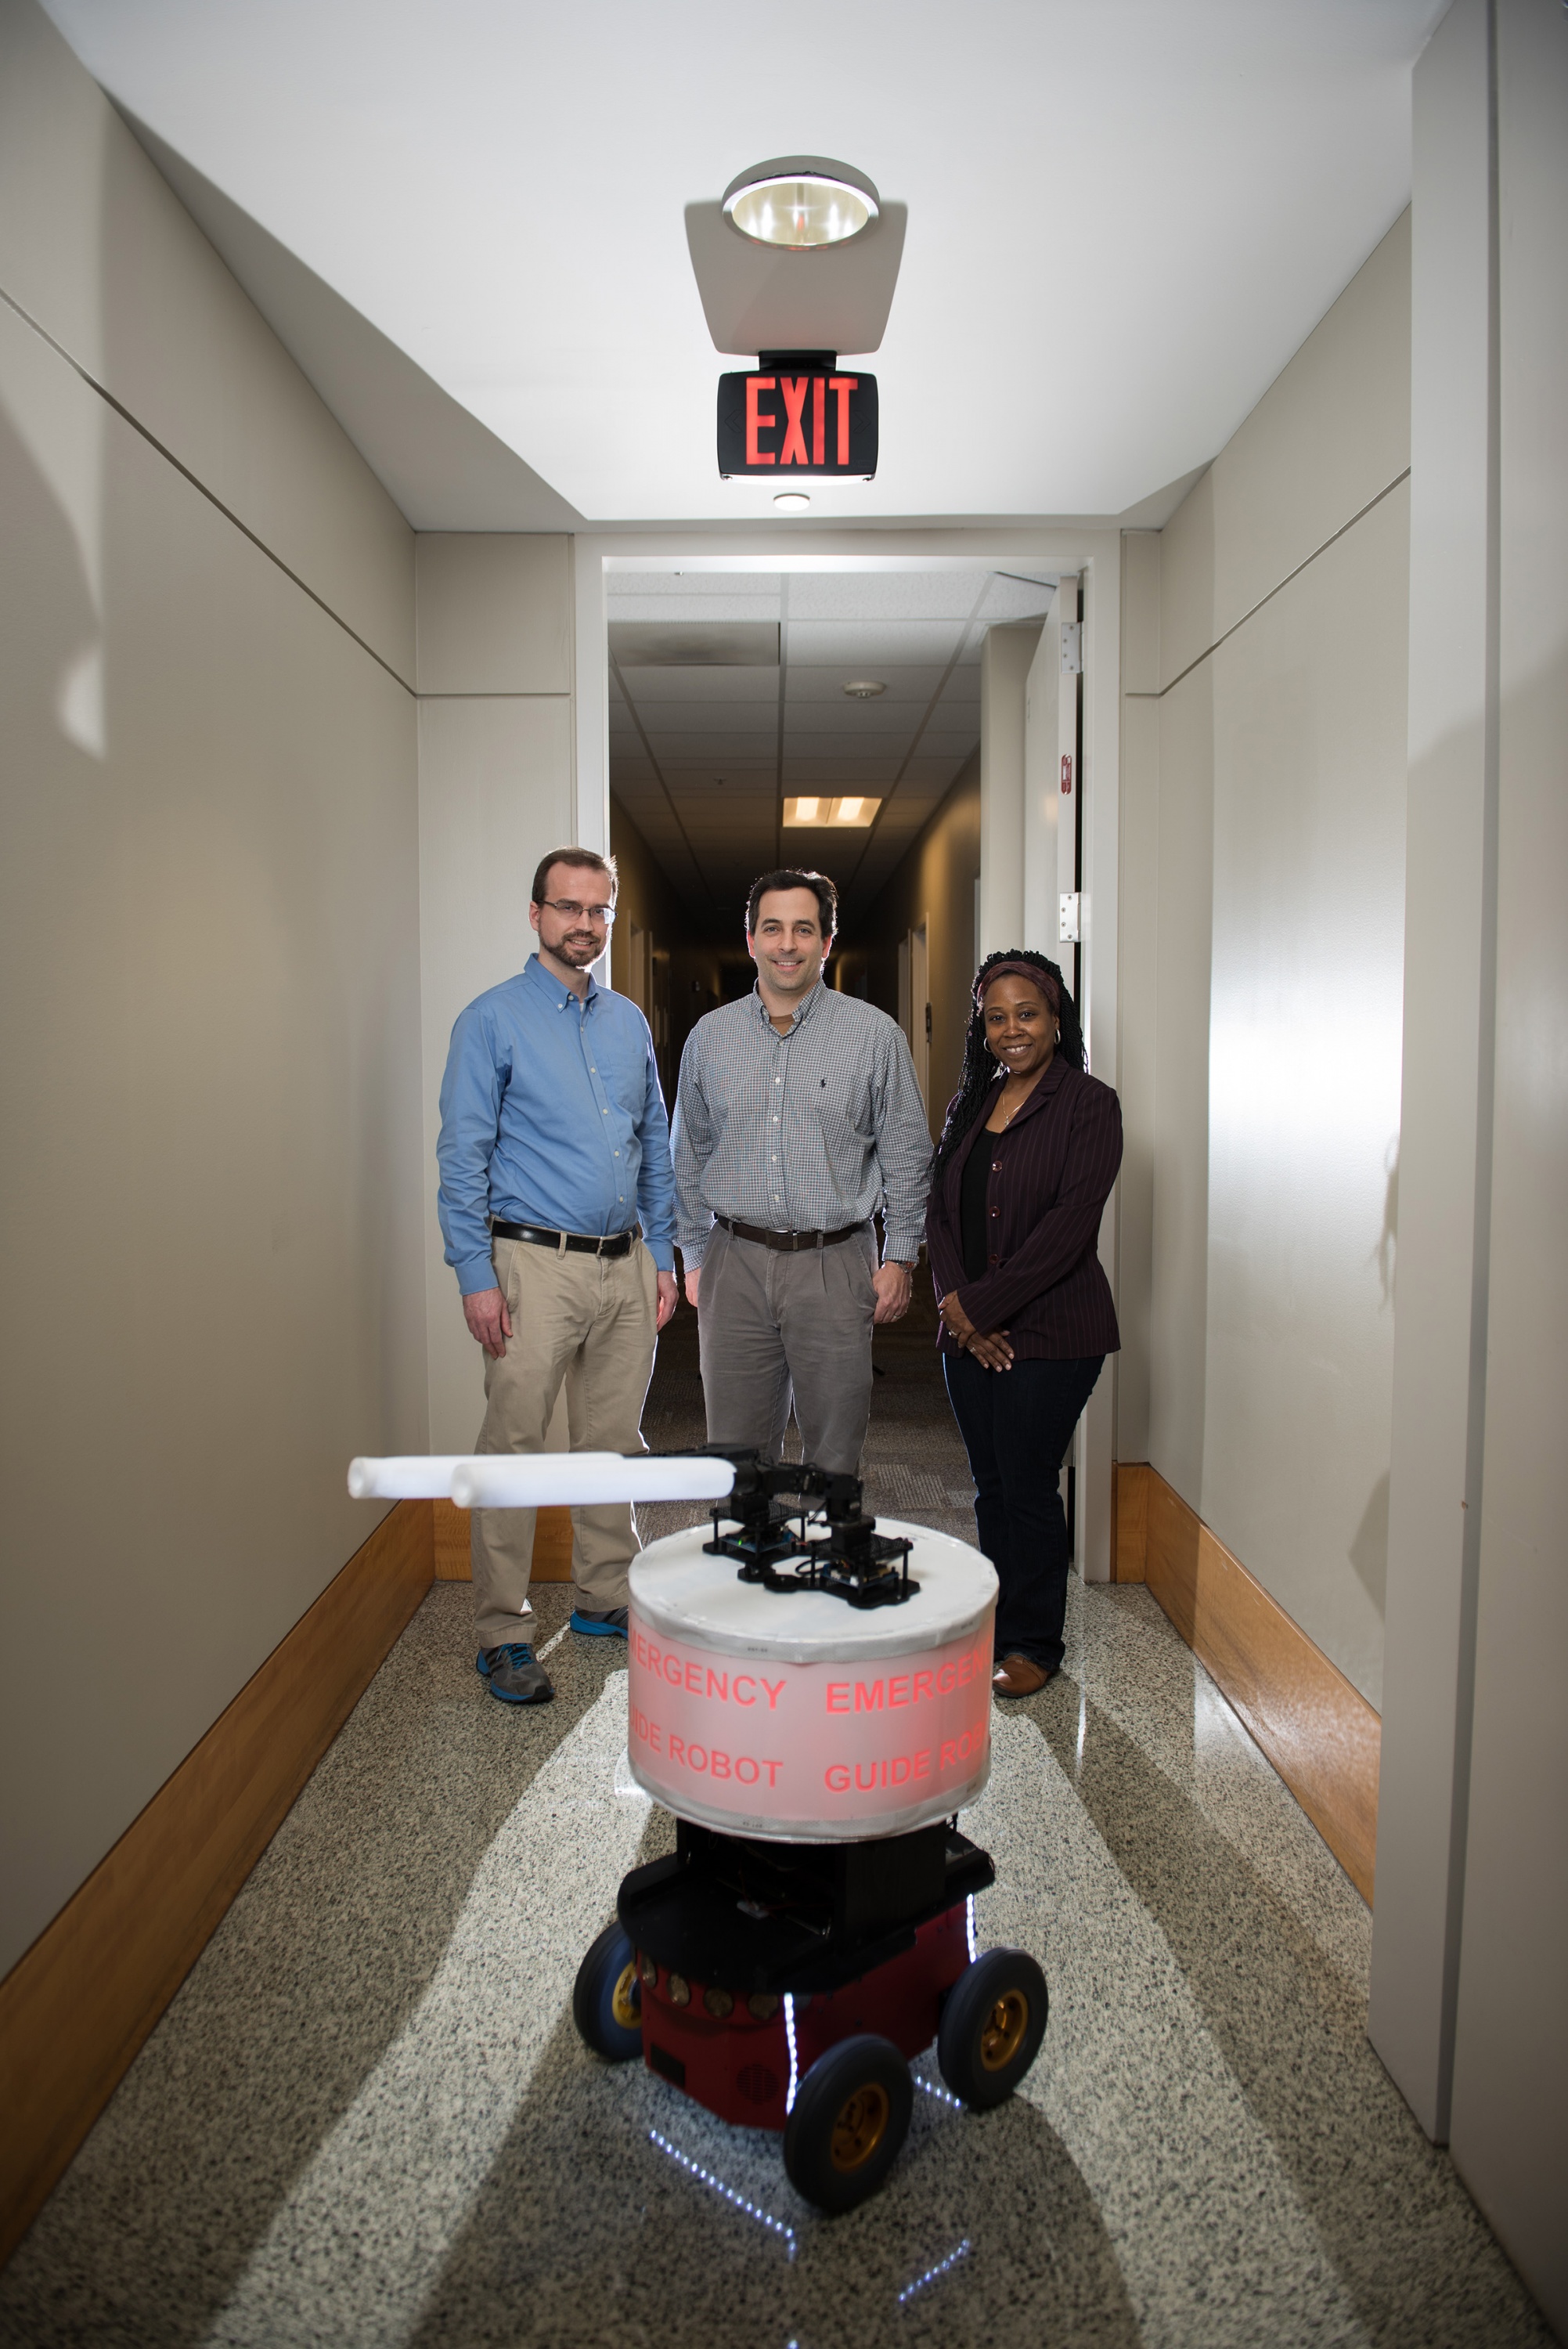  Georgia Tech researchers shown with their “Rescue Robot.” (L-R) GTRI Research Engineer Paul Robinette, GTRI Senior Research Engineer Alan Wagner and School of Electrical and Computer Engineering Professor Ayanna Howard. (Credit: Rob Felt, Georgia Tech)